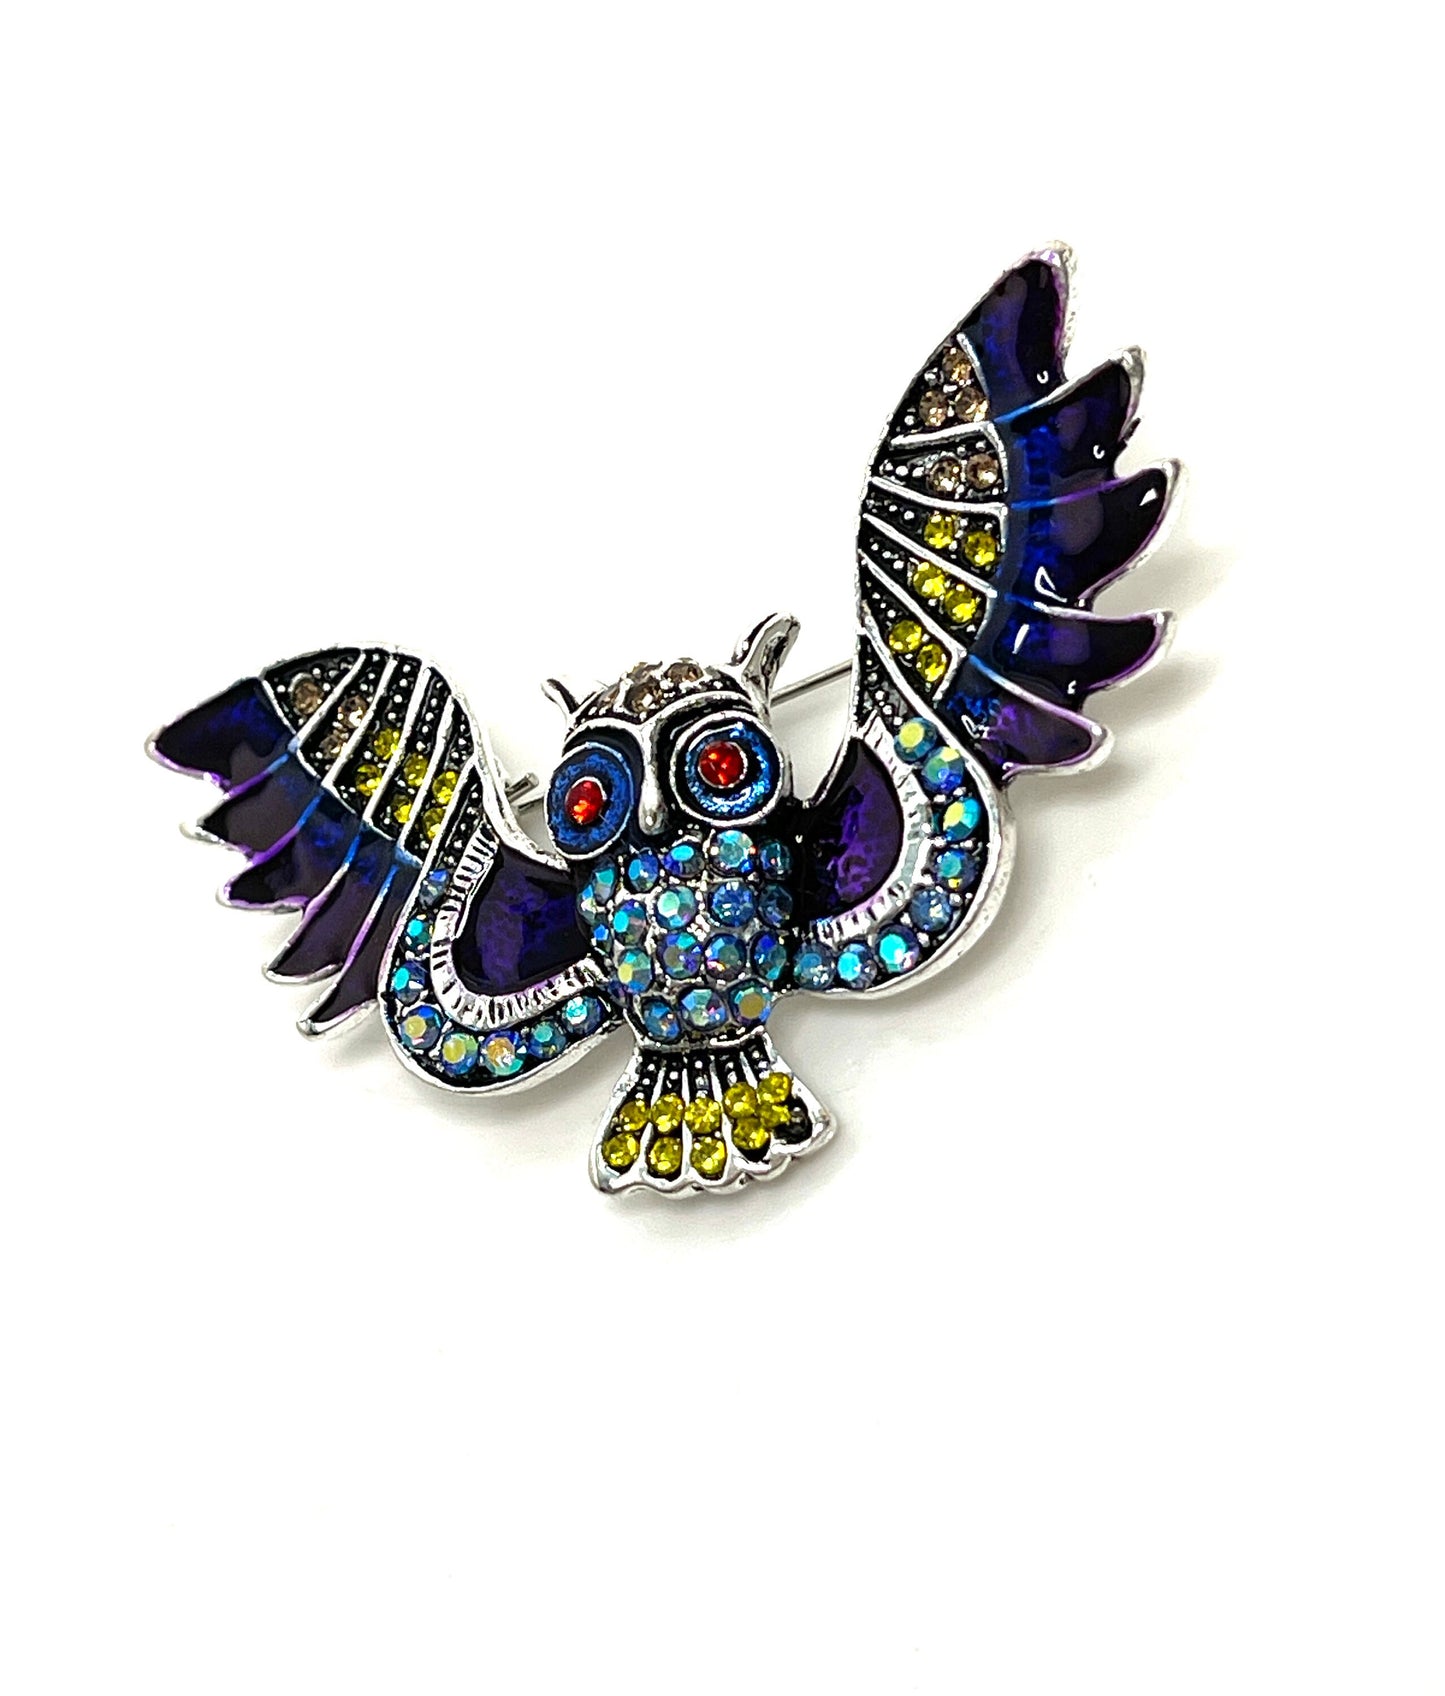 Purple Flying Owl Brooch, Rhinestone Crystal Pin, Purple Owl Sparkly Jacket Pin, Brooches For Women